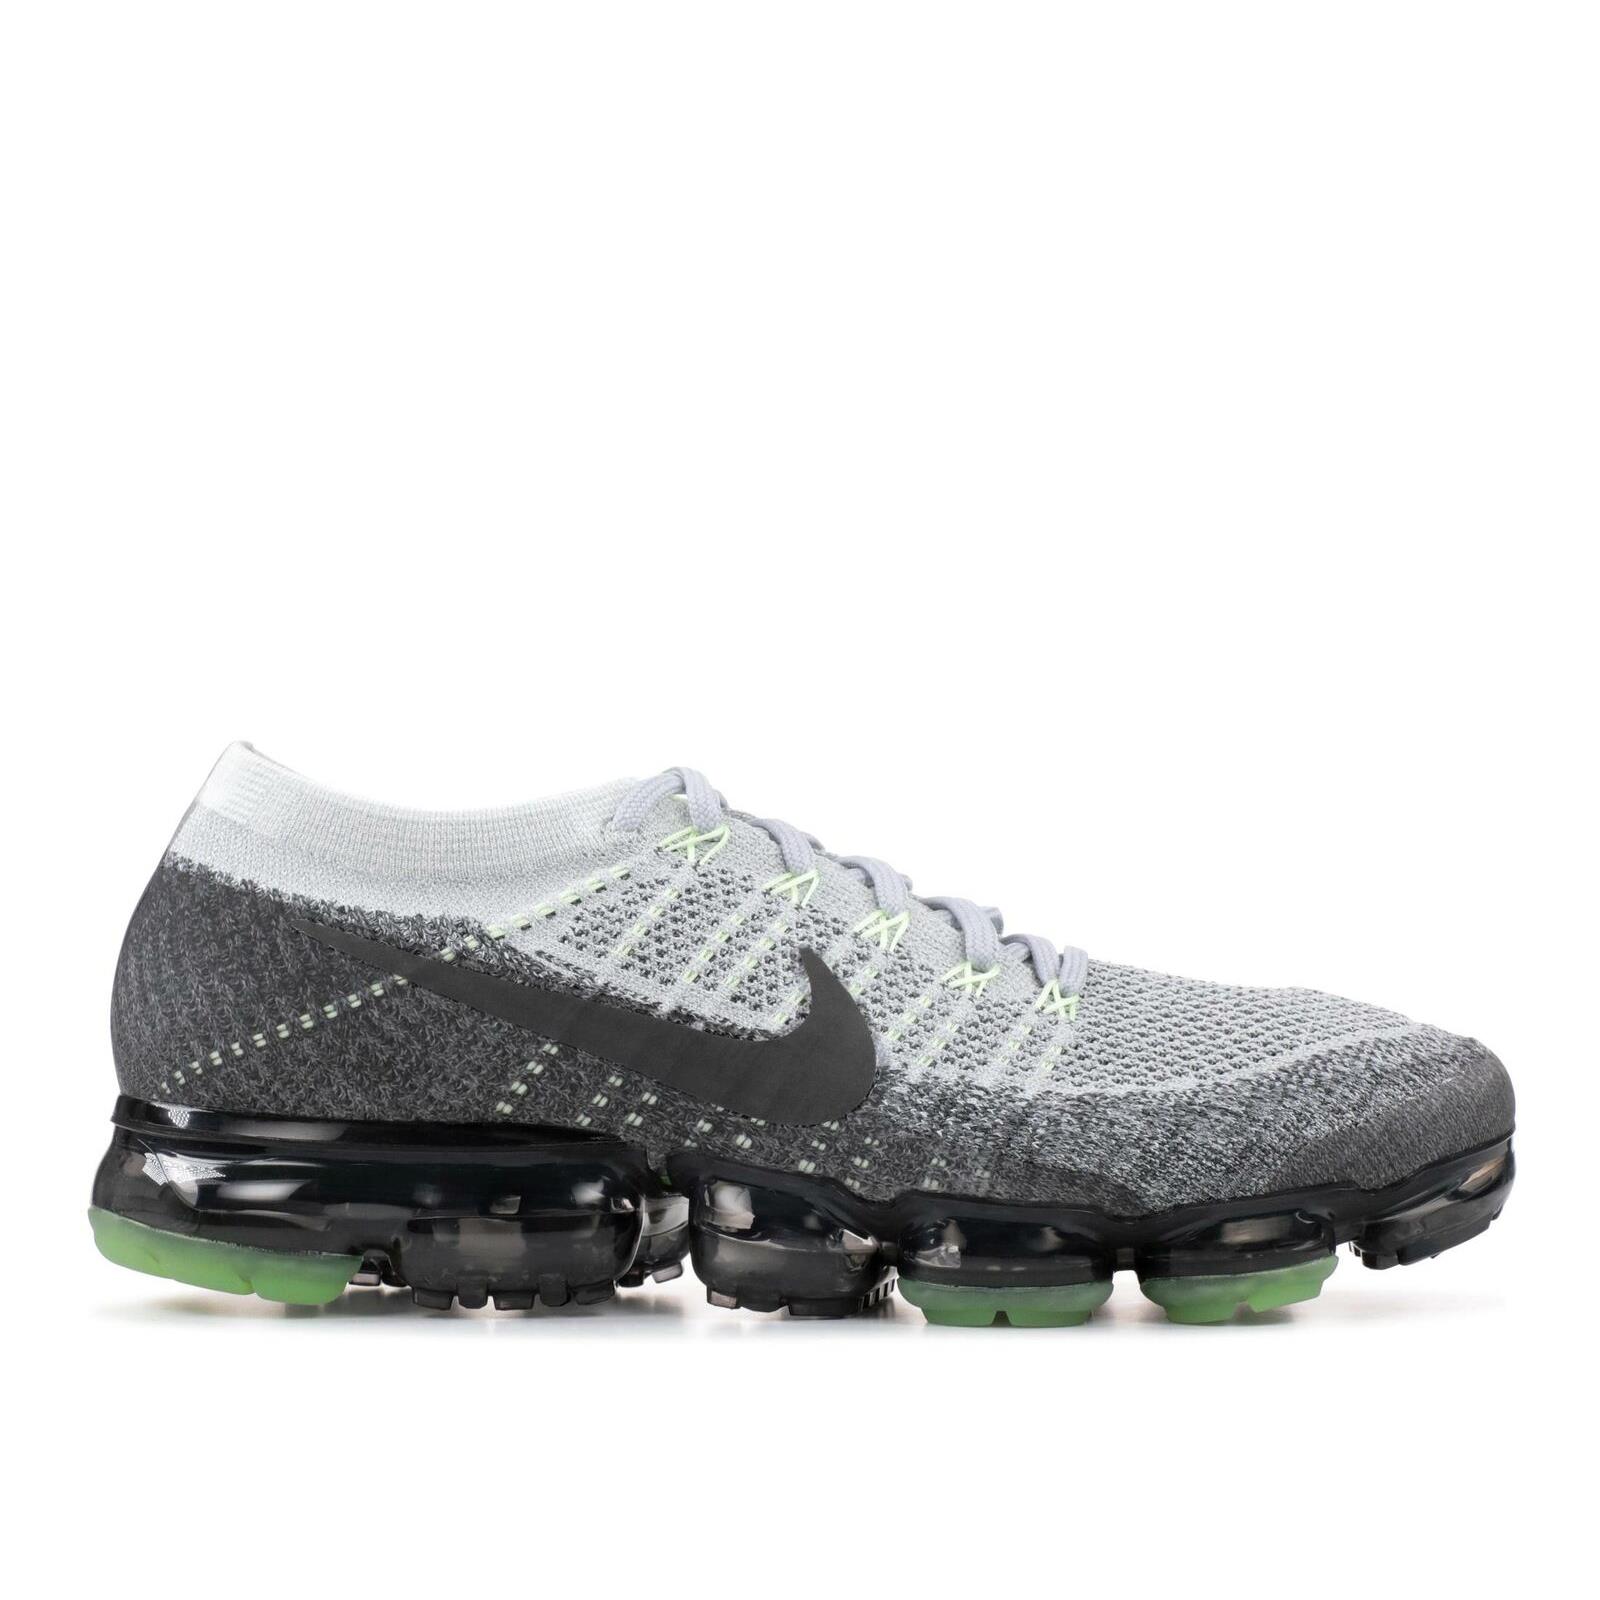 Nike Air Vapormax Flyknit Heritage Pack Pure Platinum Anthracite Grey 922915-002 - Gray